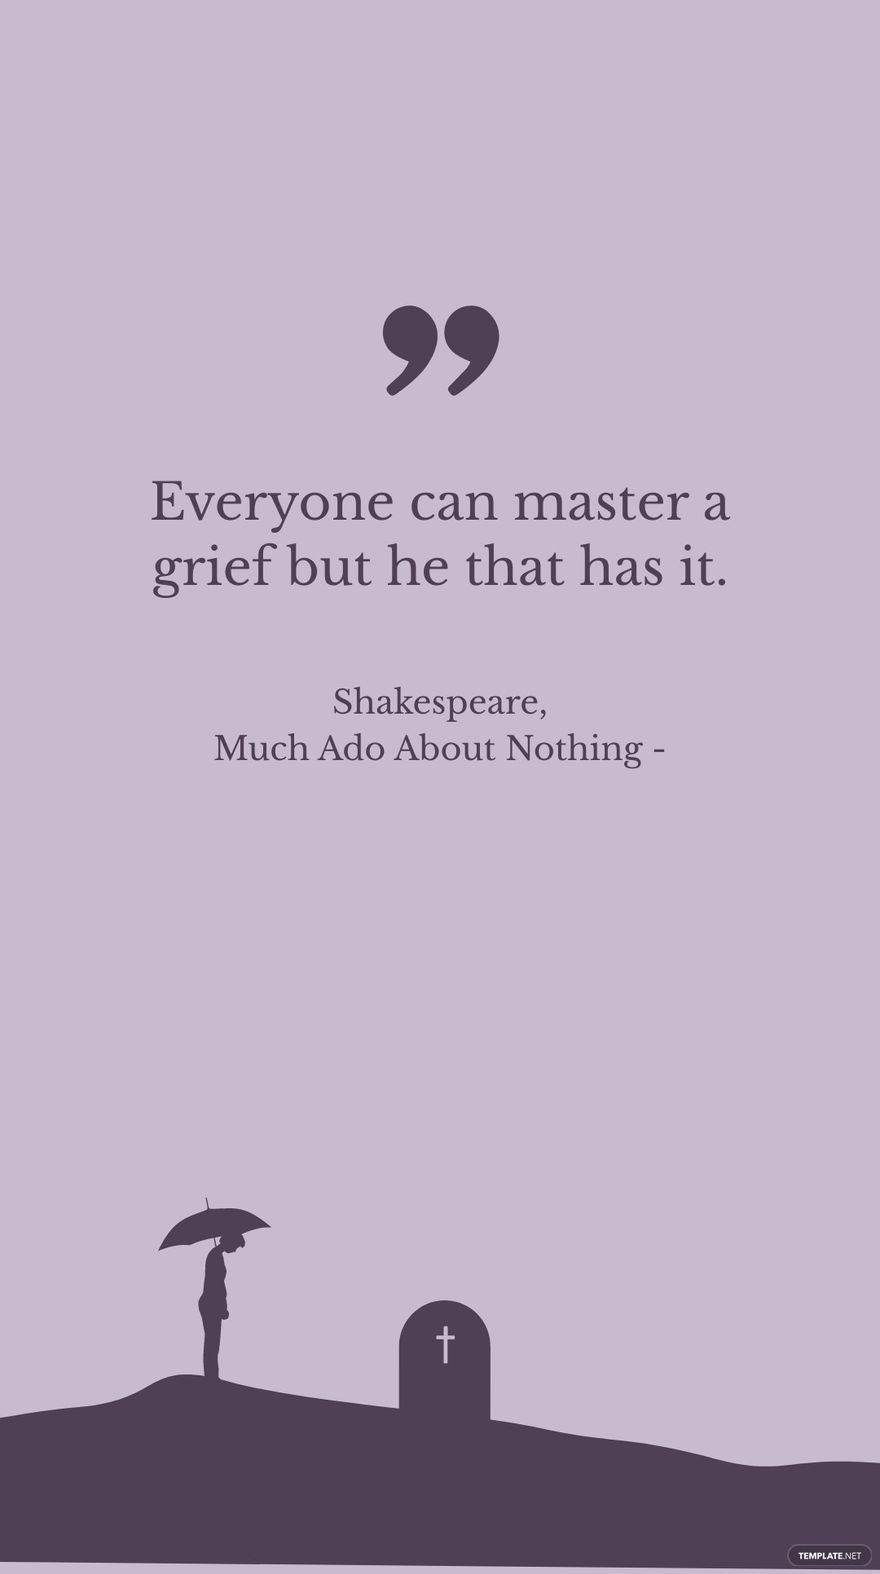 Free Shakespeare, Much Ado About Nothing - Everyone can master a grief but he that has it. in JPG